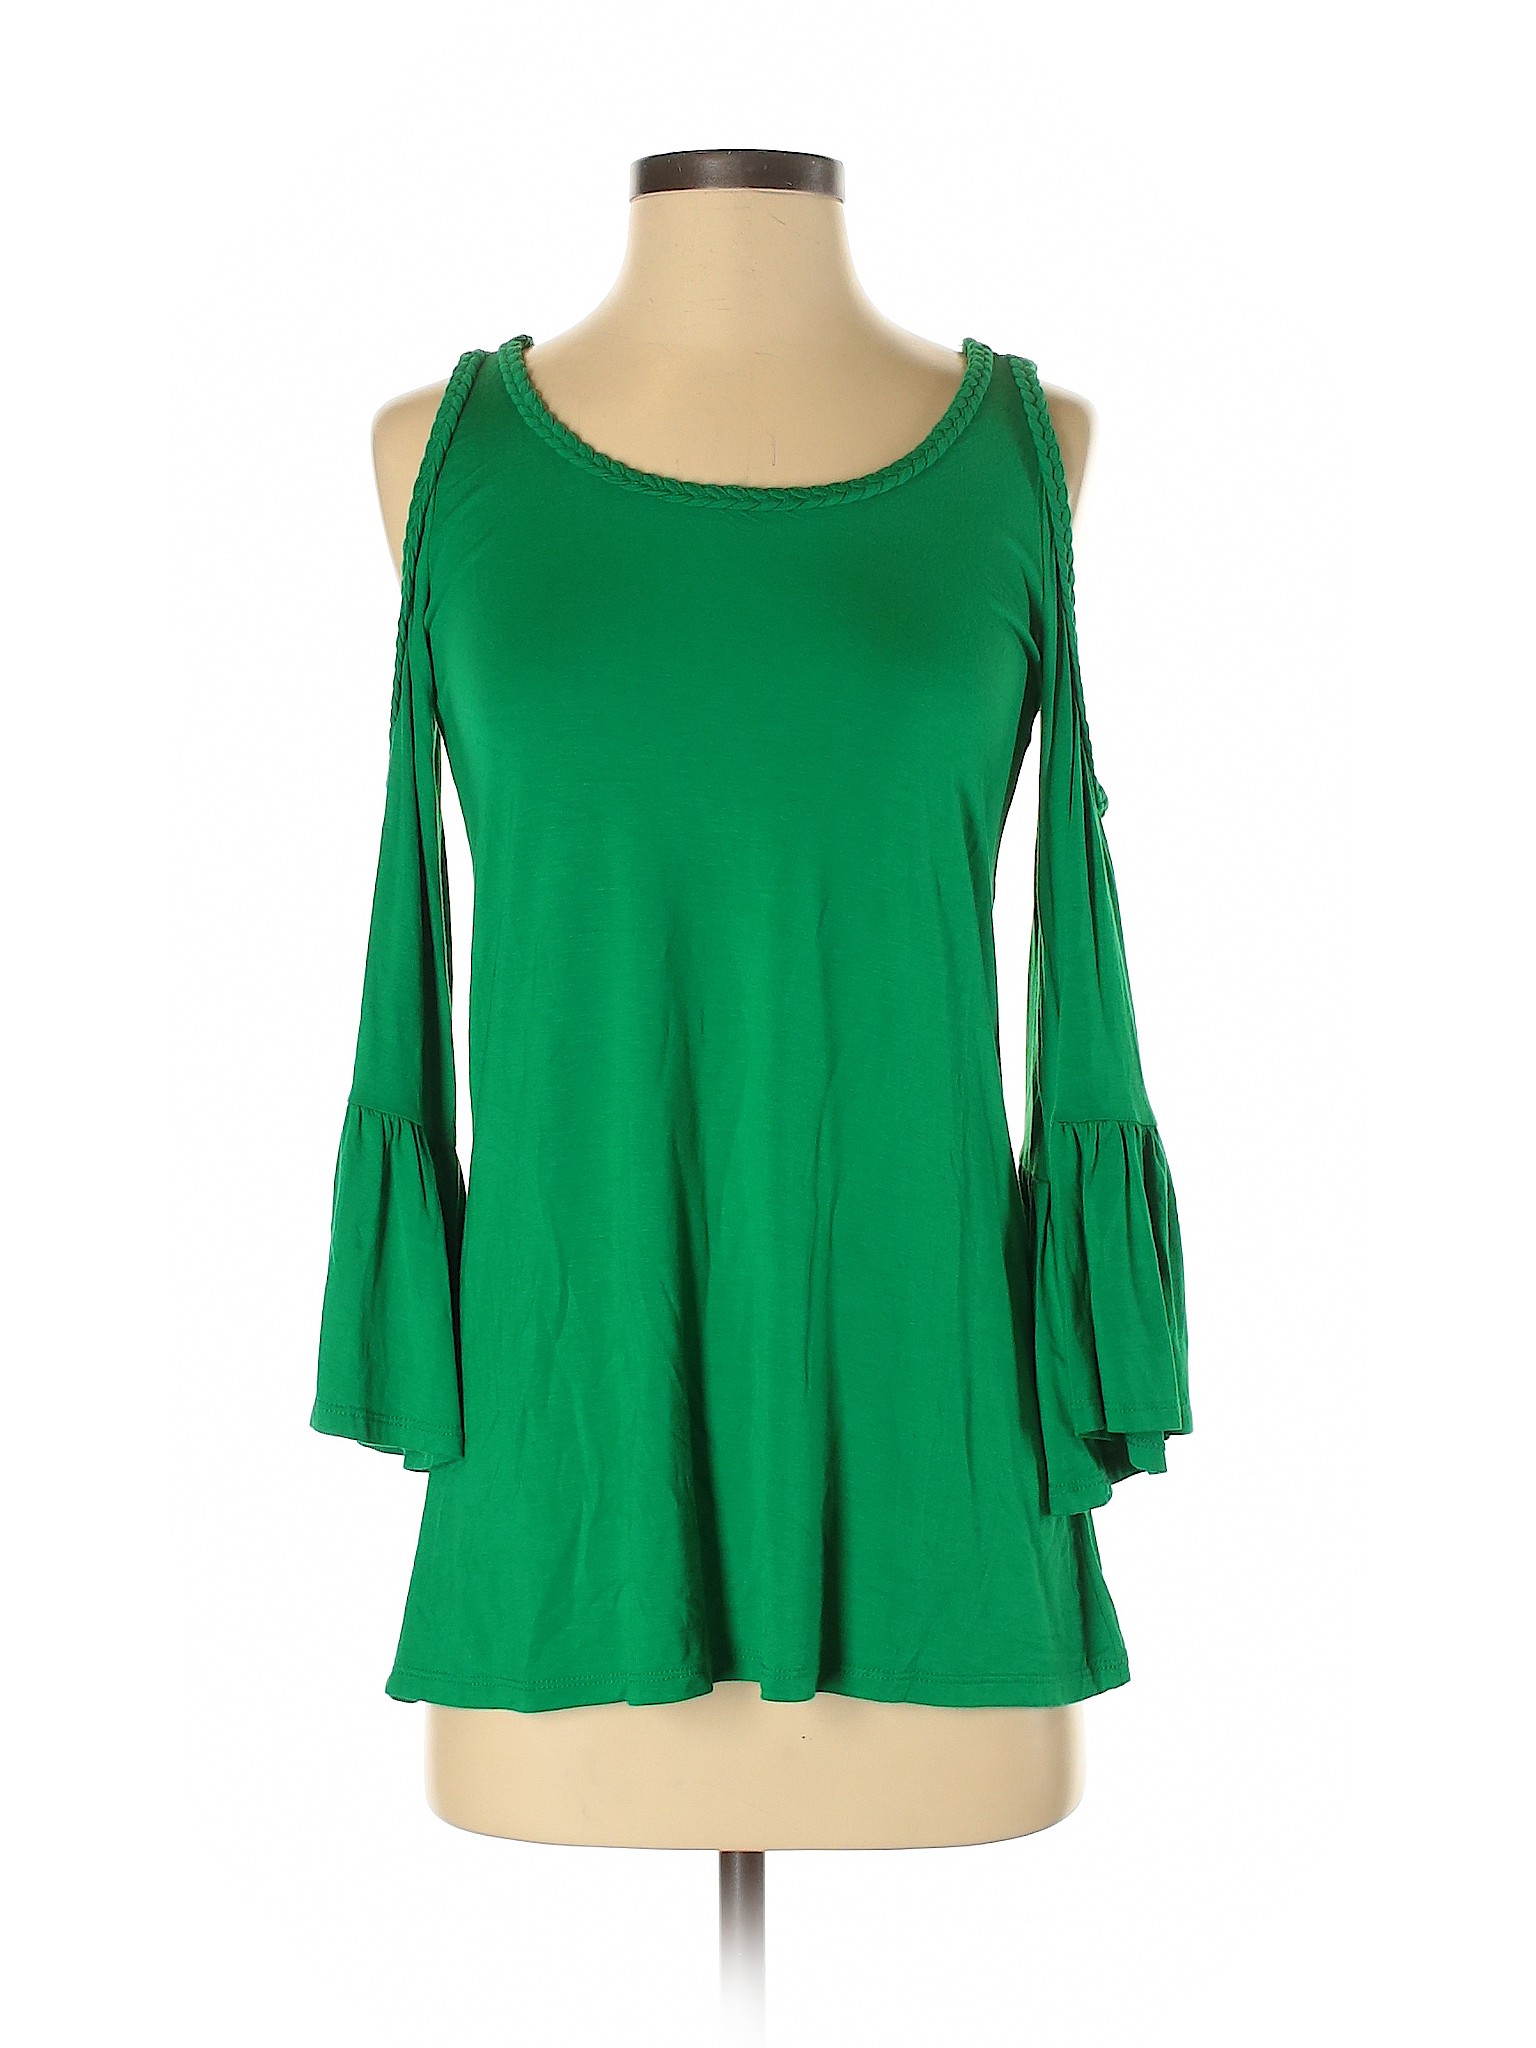 NWT Cable & Gauge Women Green 3/4 Sleeve Top S | eBay